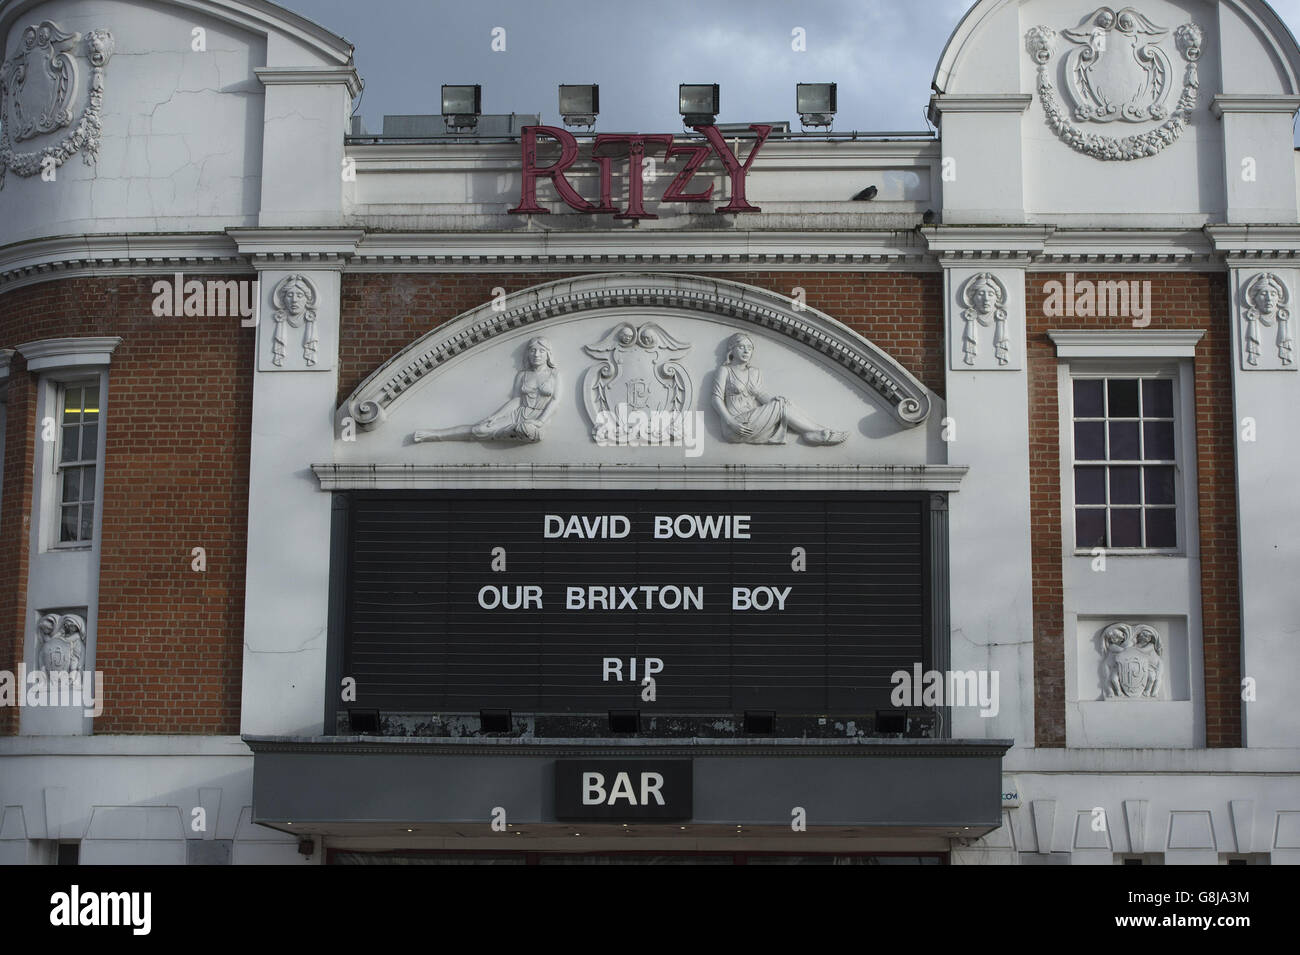 A tribute to David Bowie is seen on the Ritzy cinema in Brixton, London, the singers birthplace, after the rock star died following an 18-month battle with cancer. Stock Photo